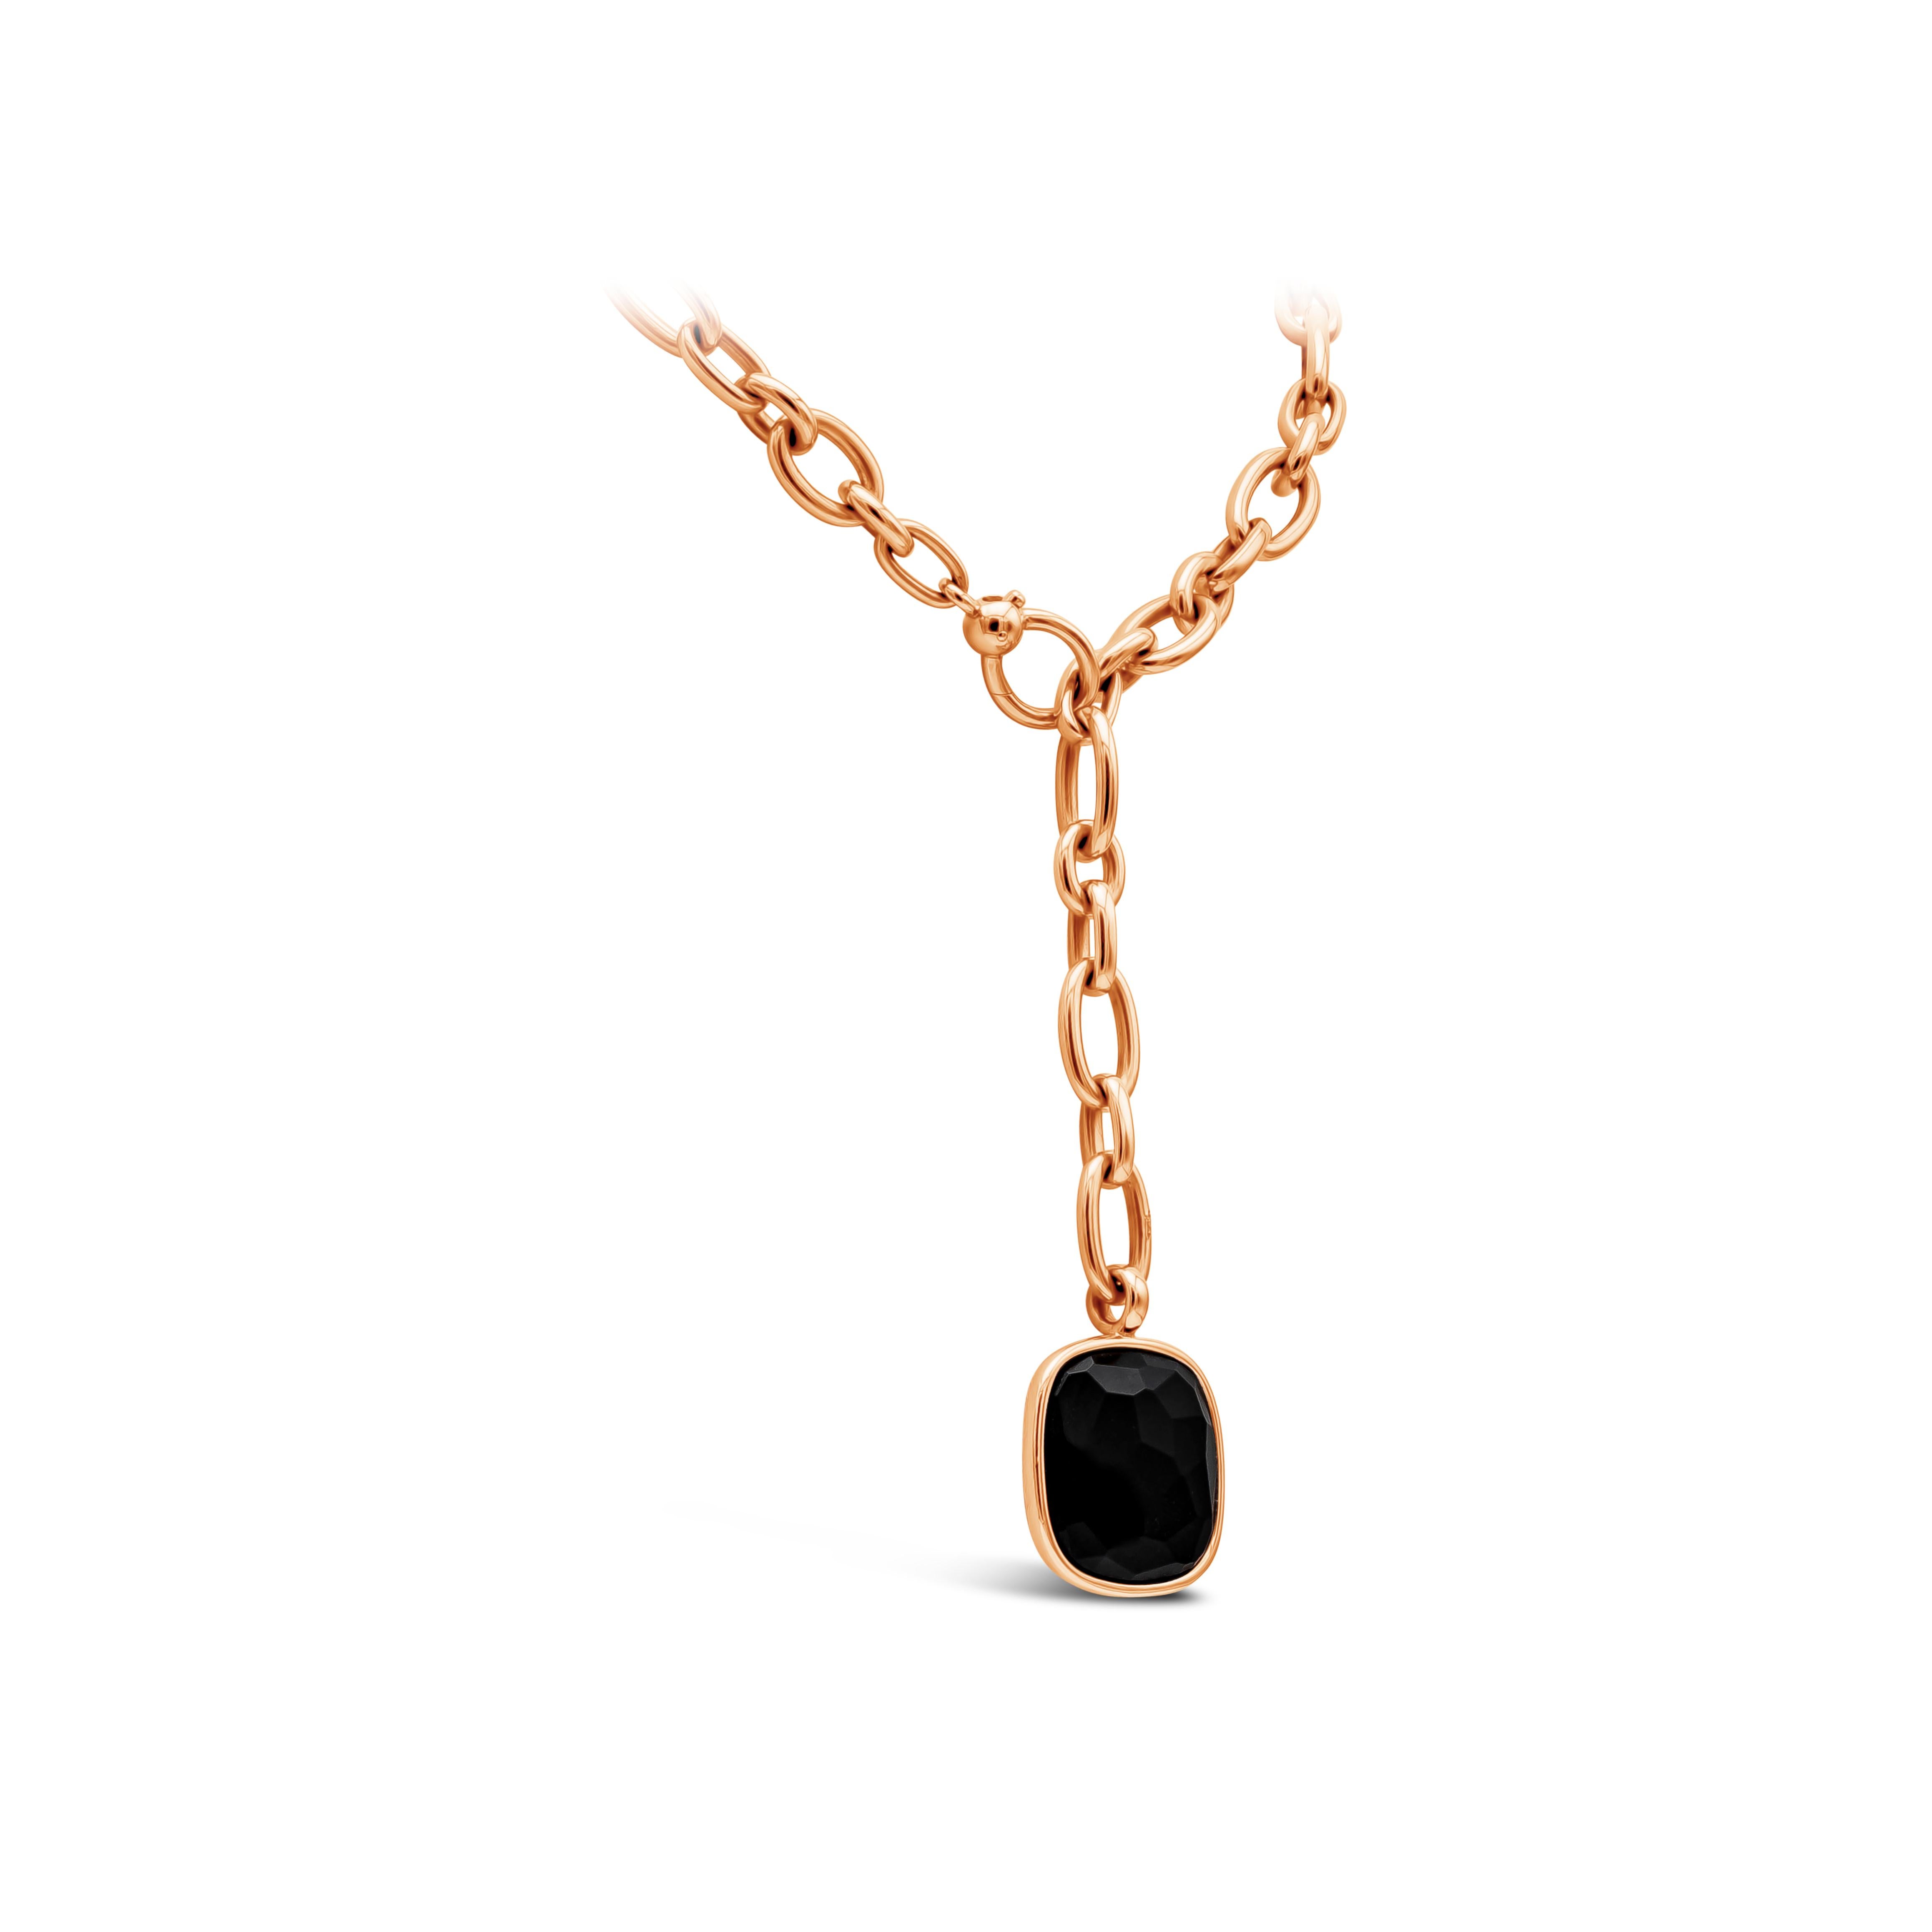 A fabulous and authentic necklace designed by Pomellato showcasing a faceted cushion cut black jet pendant in 18 karats rose gold chain links. From the Victoria Collection